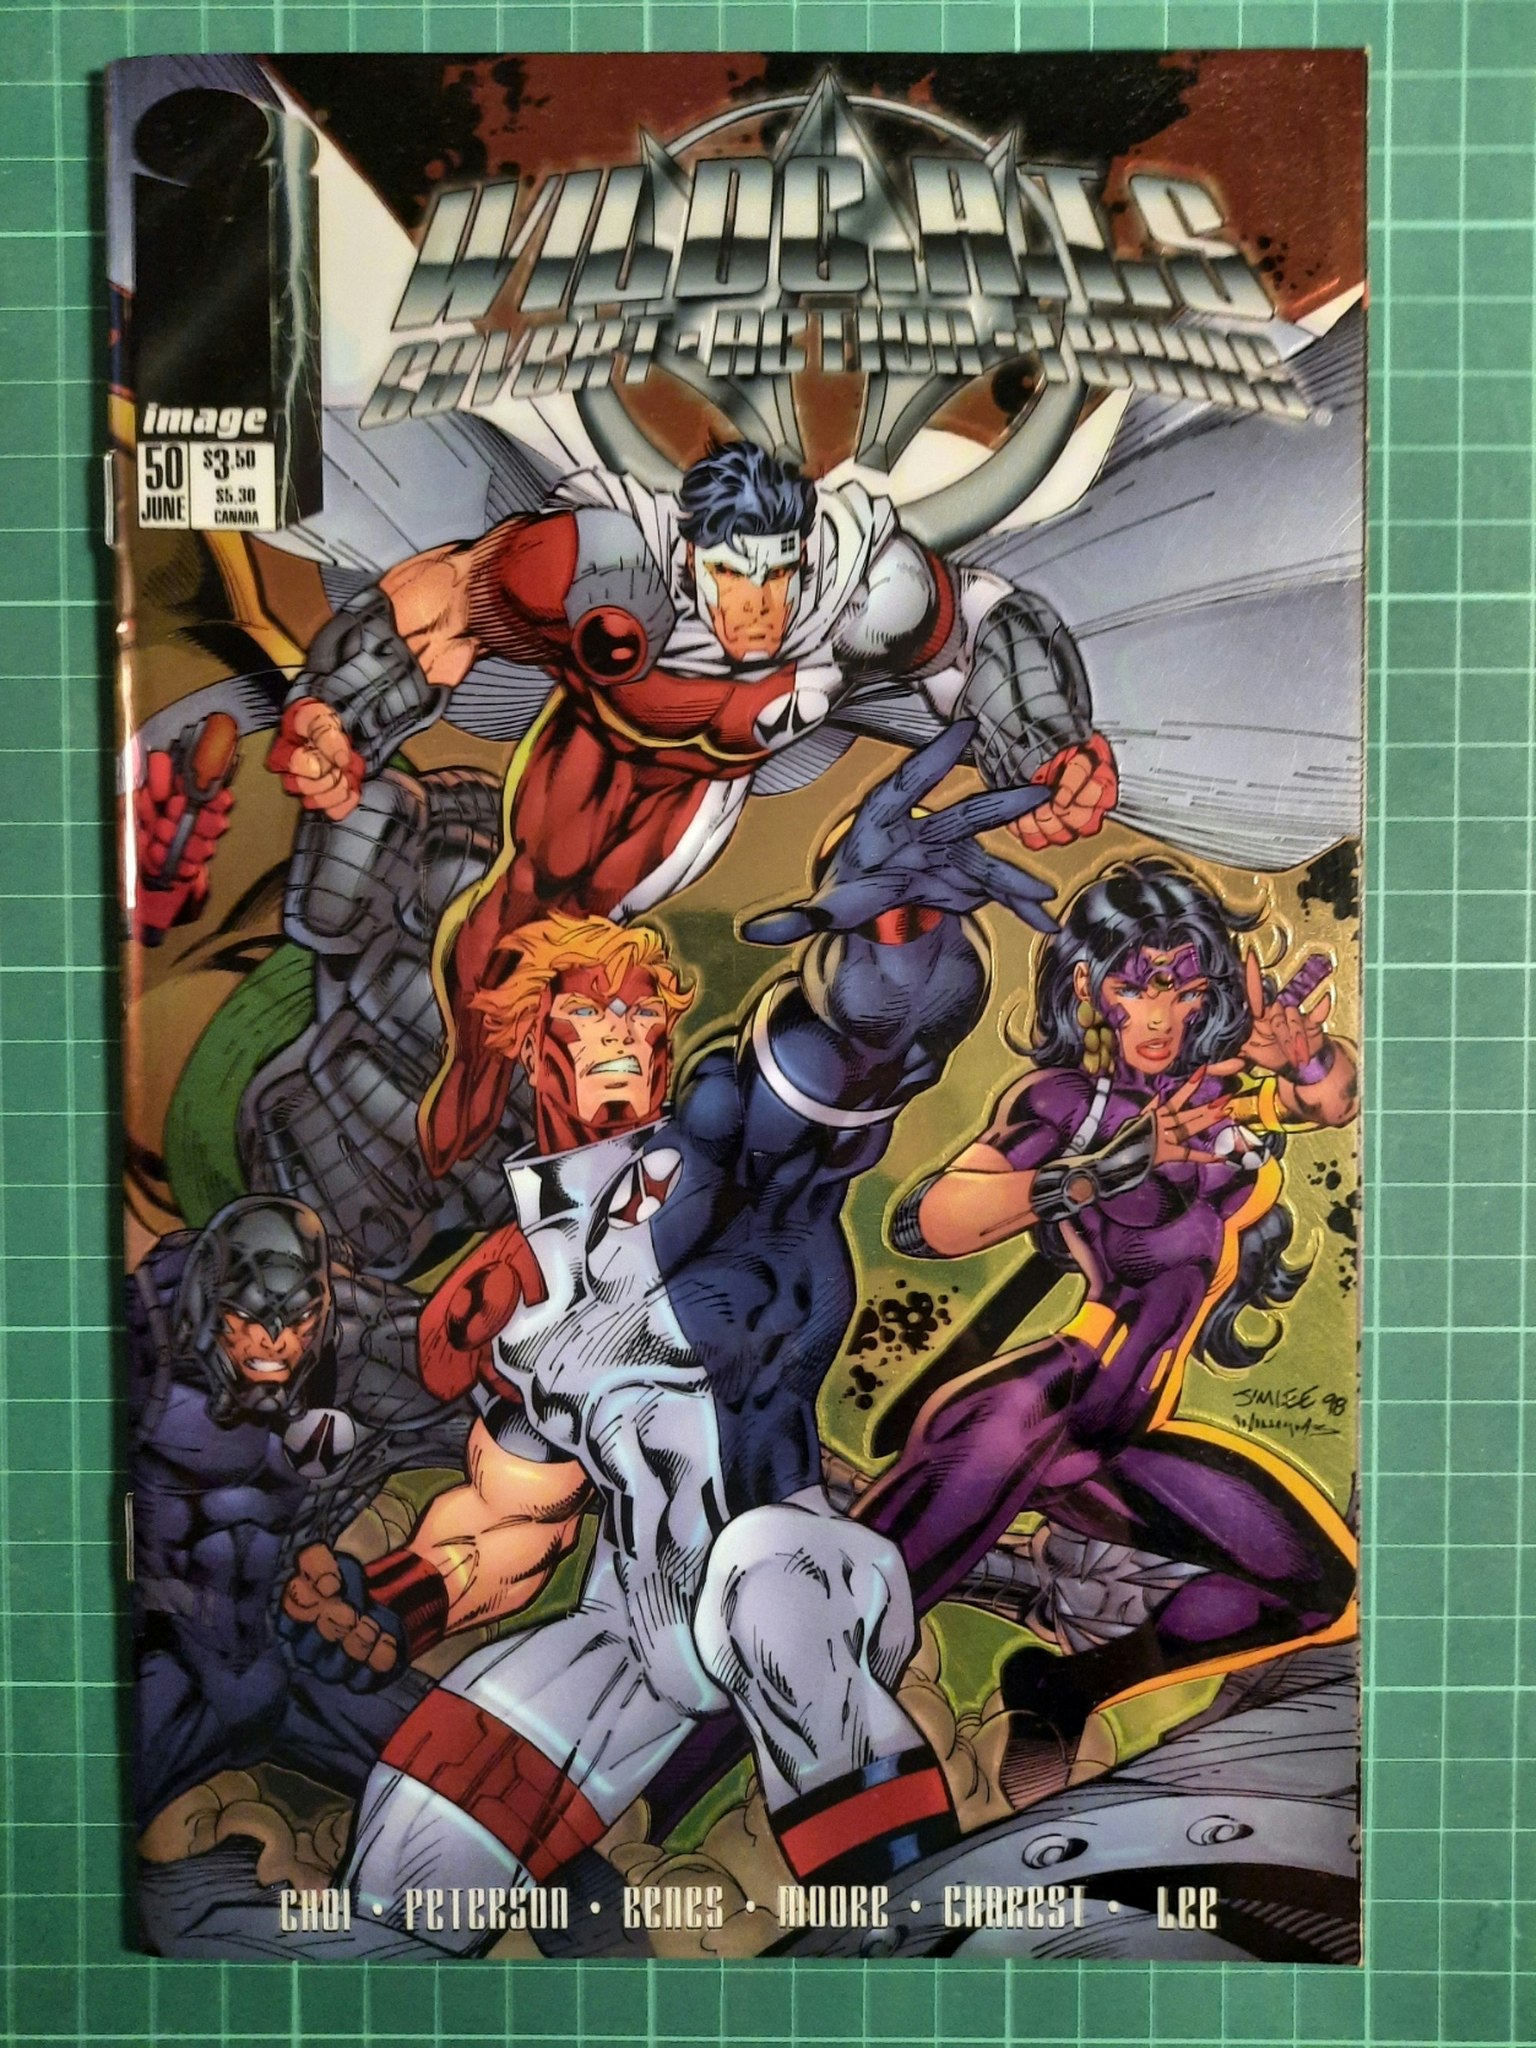 Wildcats #50 crome cover utgave